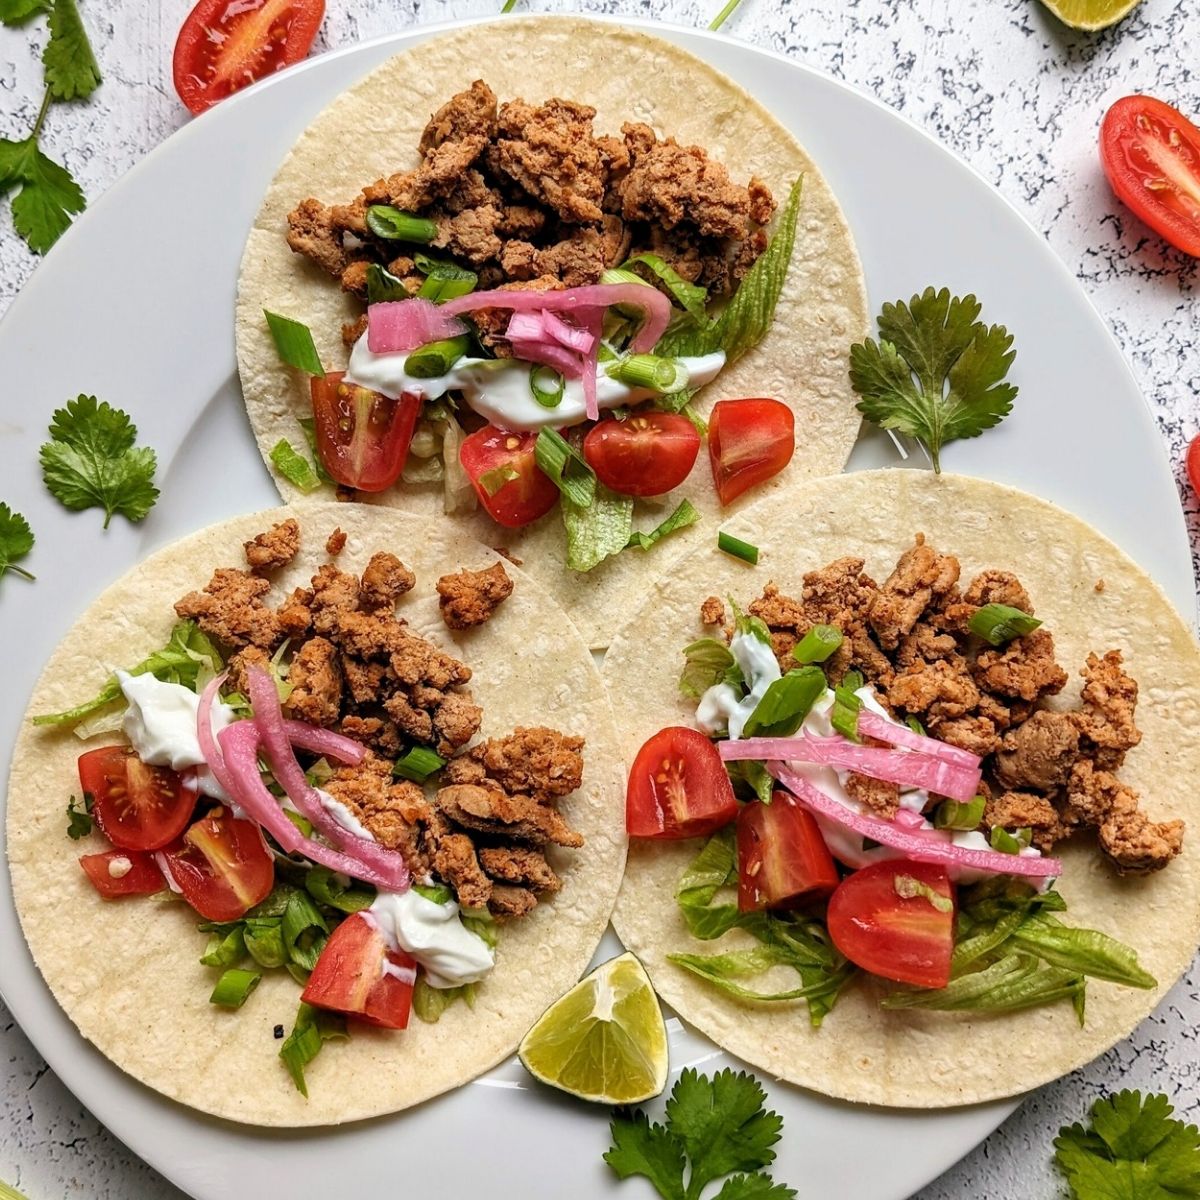 low sodium tacos recipe with ground turkey and unsalted corn tortillas